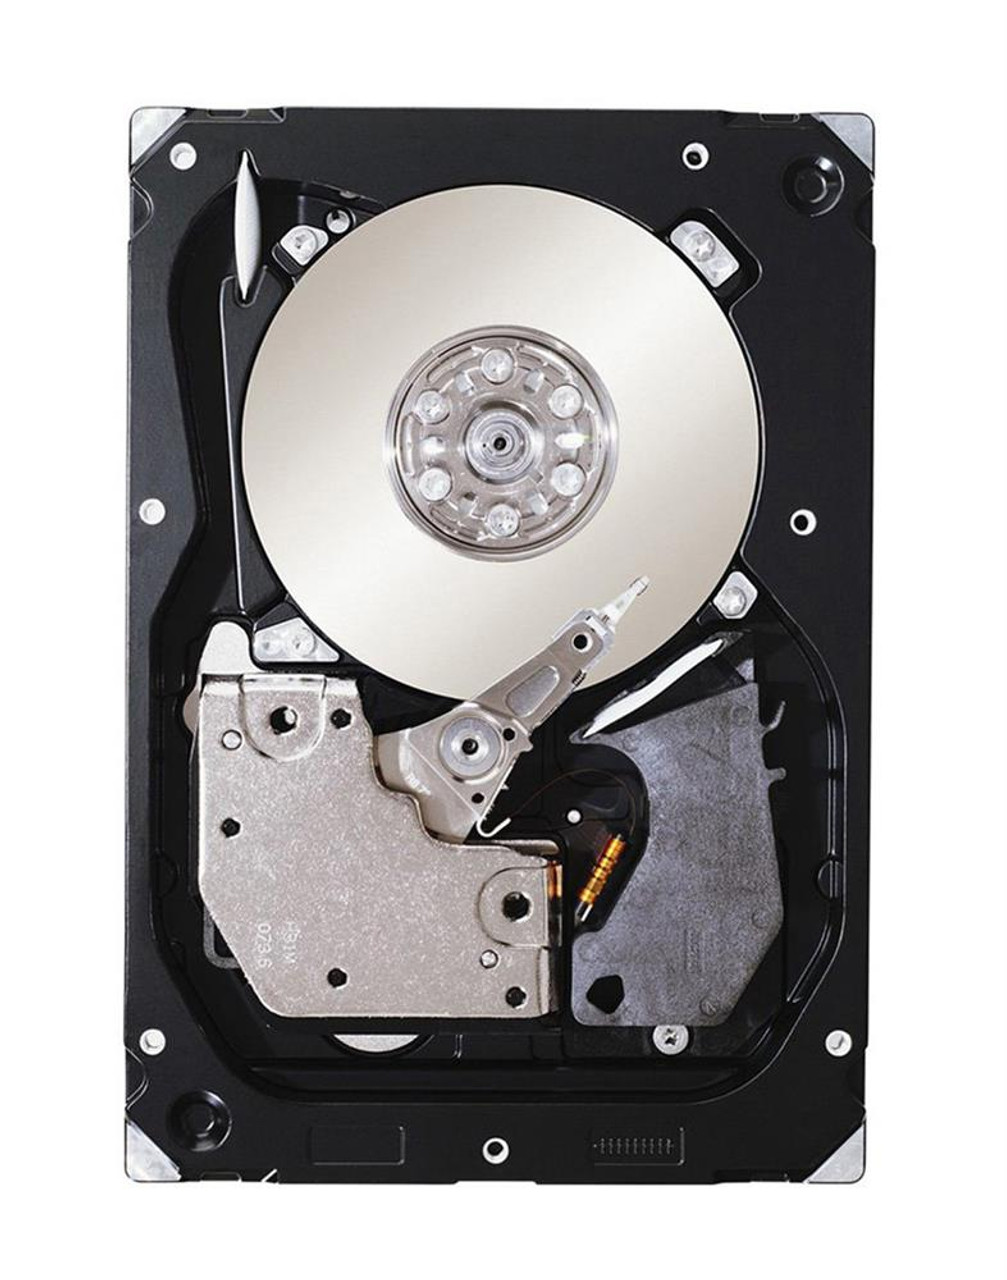 0NG351 Dell 146GB 10000RPM Fibre Channel 2Gbps 3.5-inch Internal Hard Drive